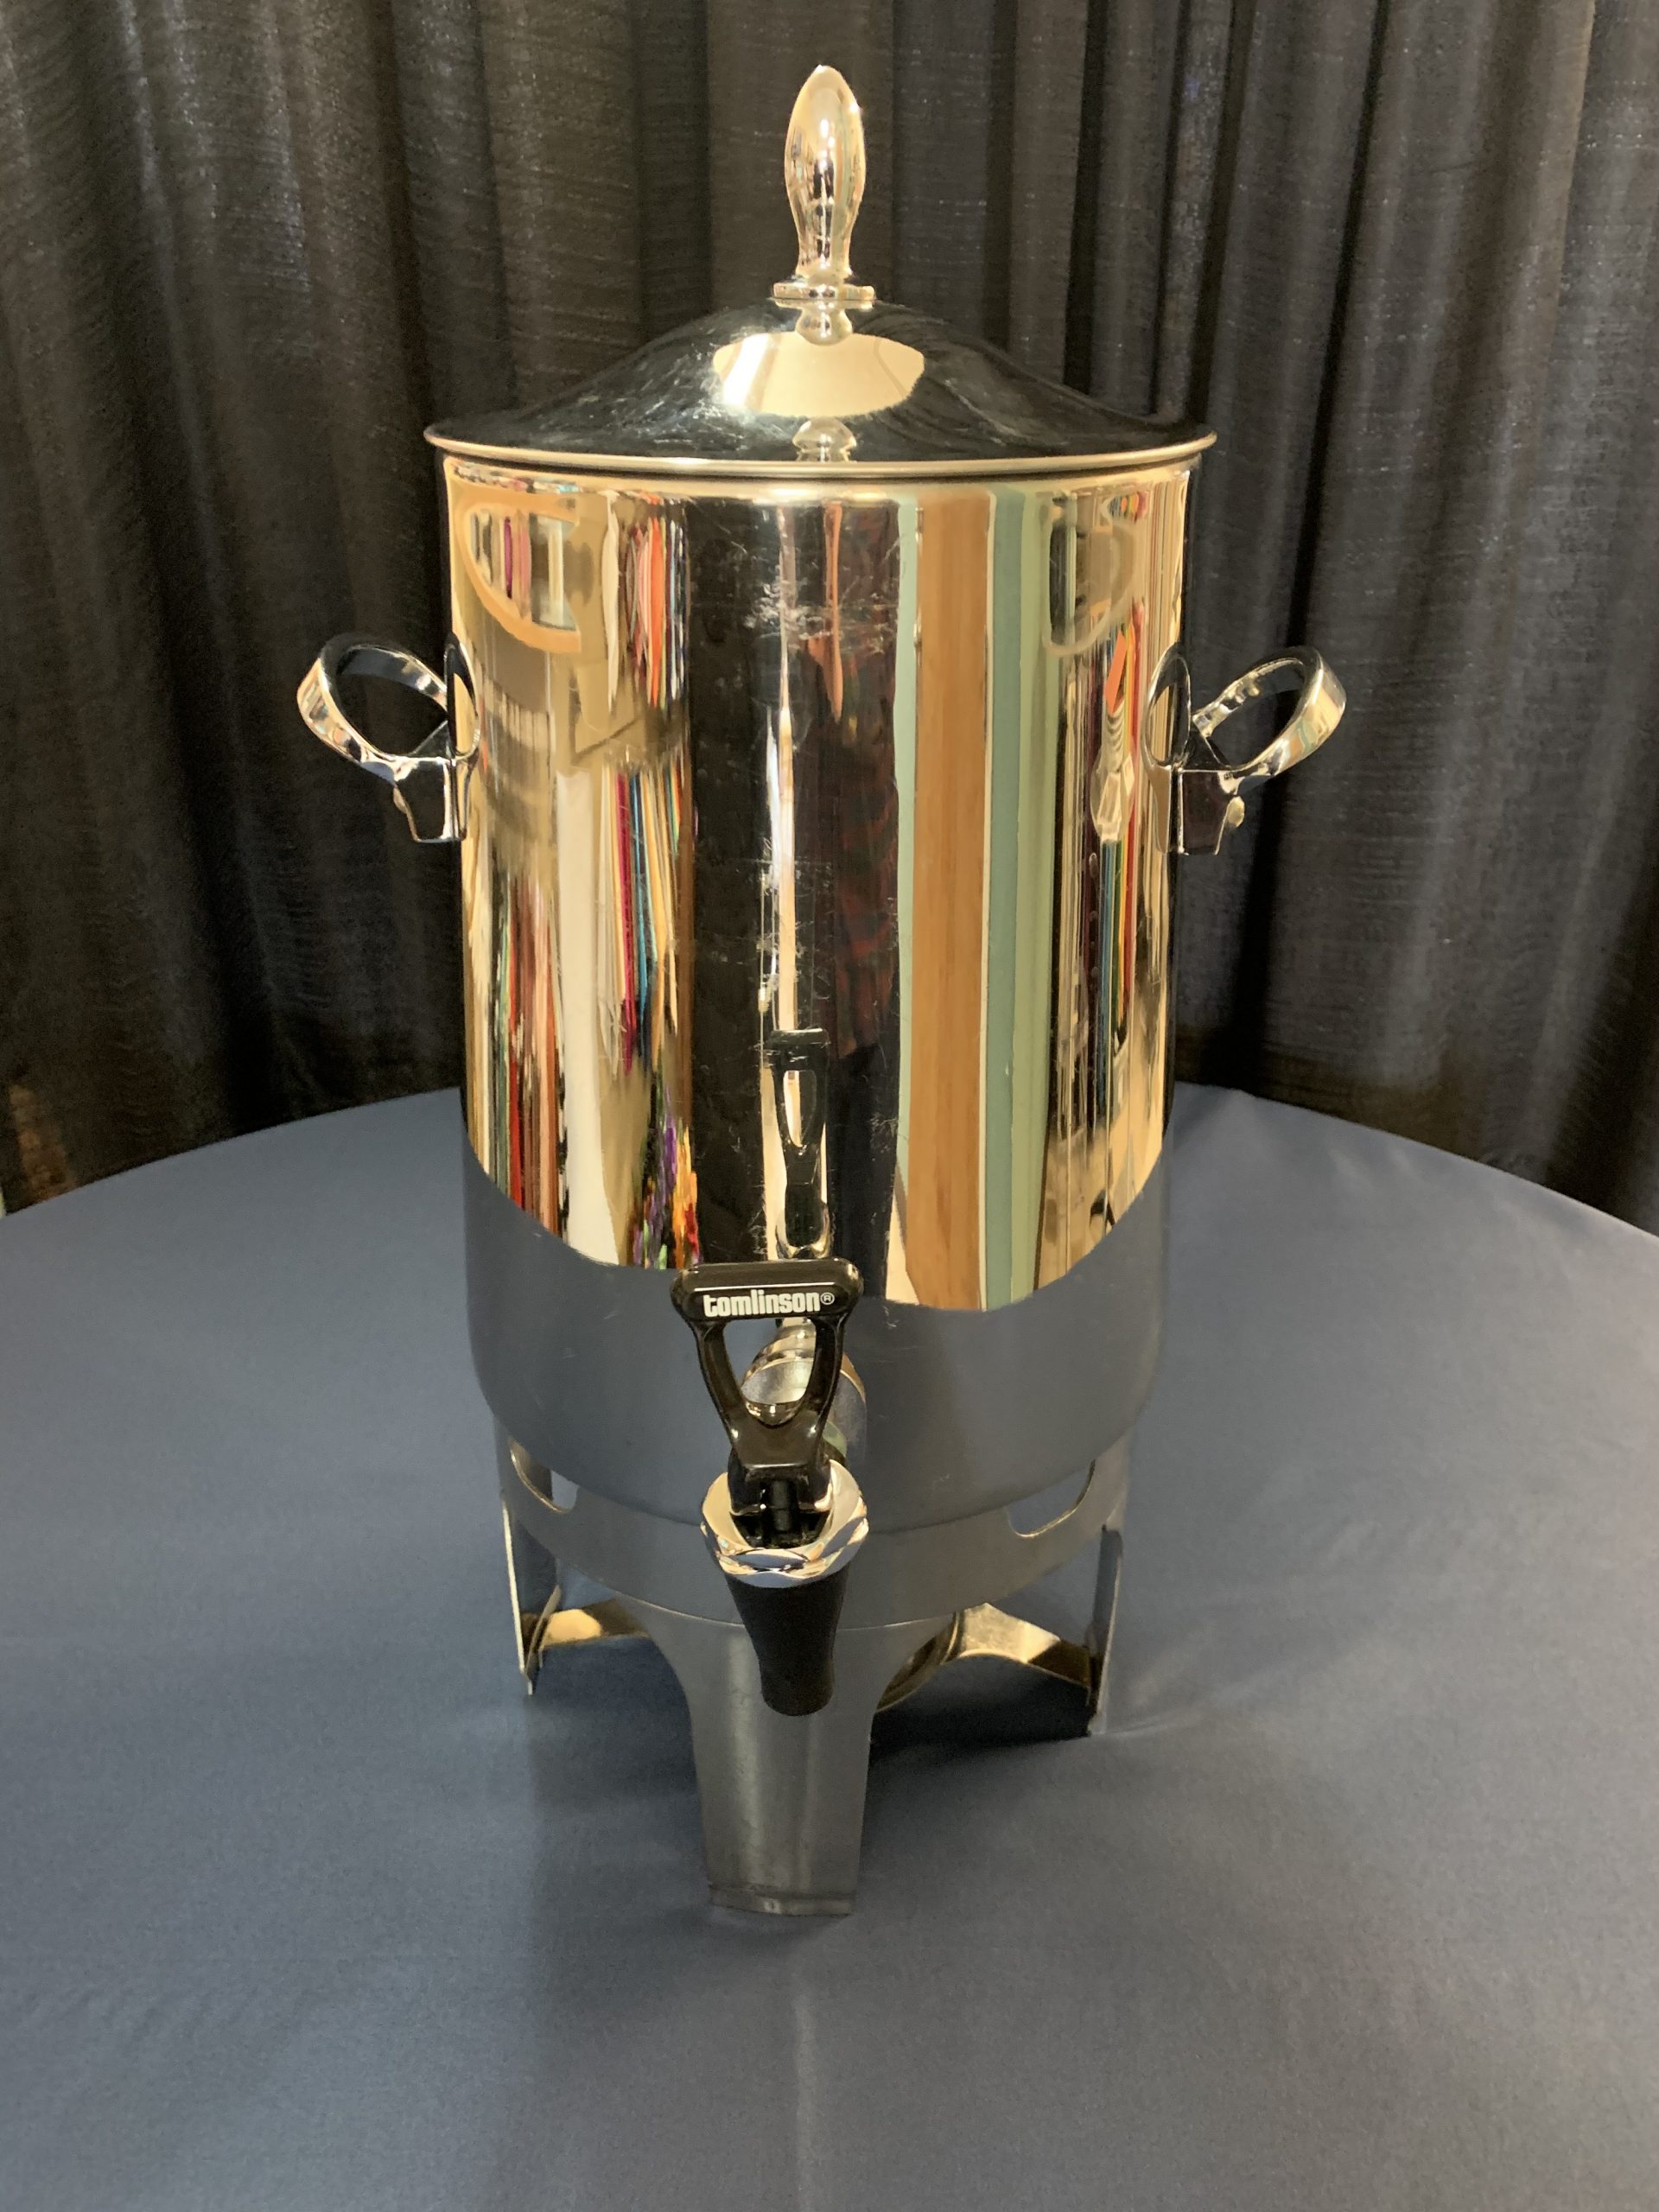 Coffee Urn Stainless Steel 24 Cup - Unique Party Rental